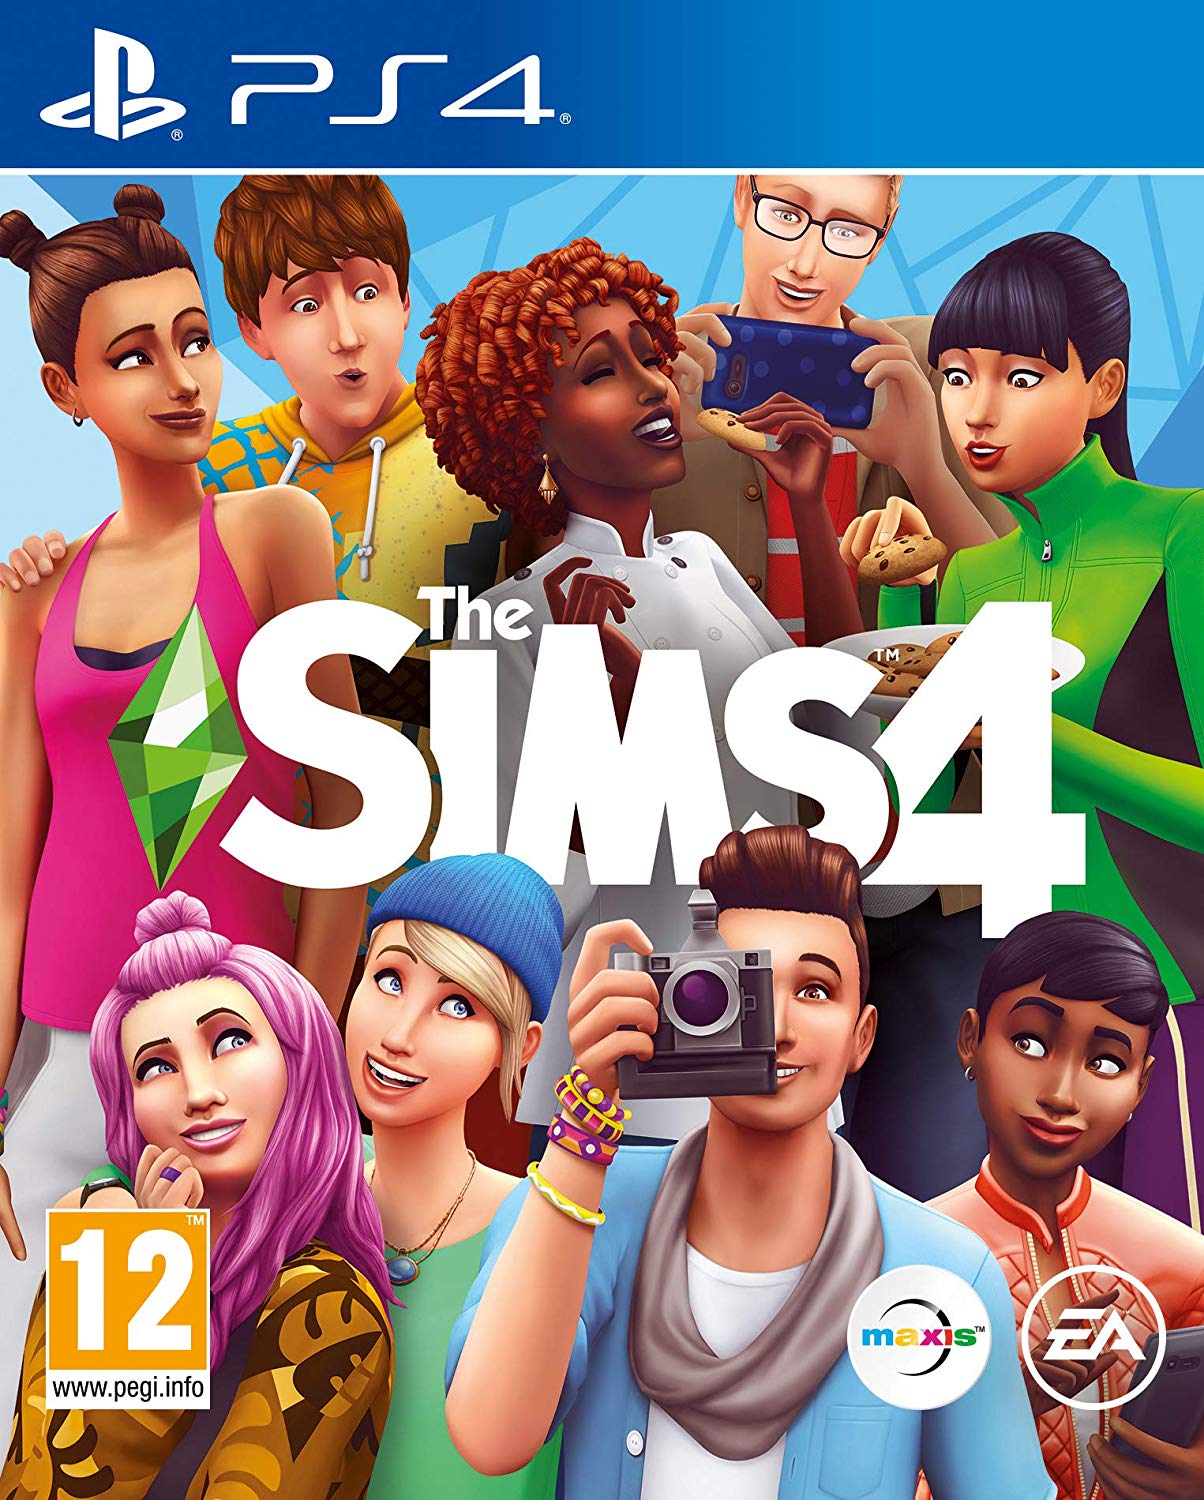 Sims 4, The (PS4) | PlayStation 4